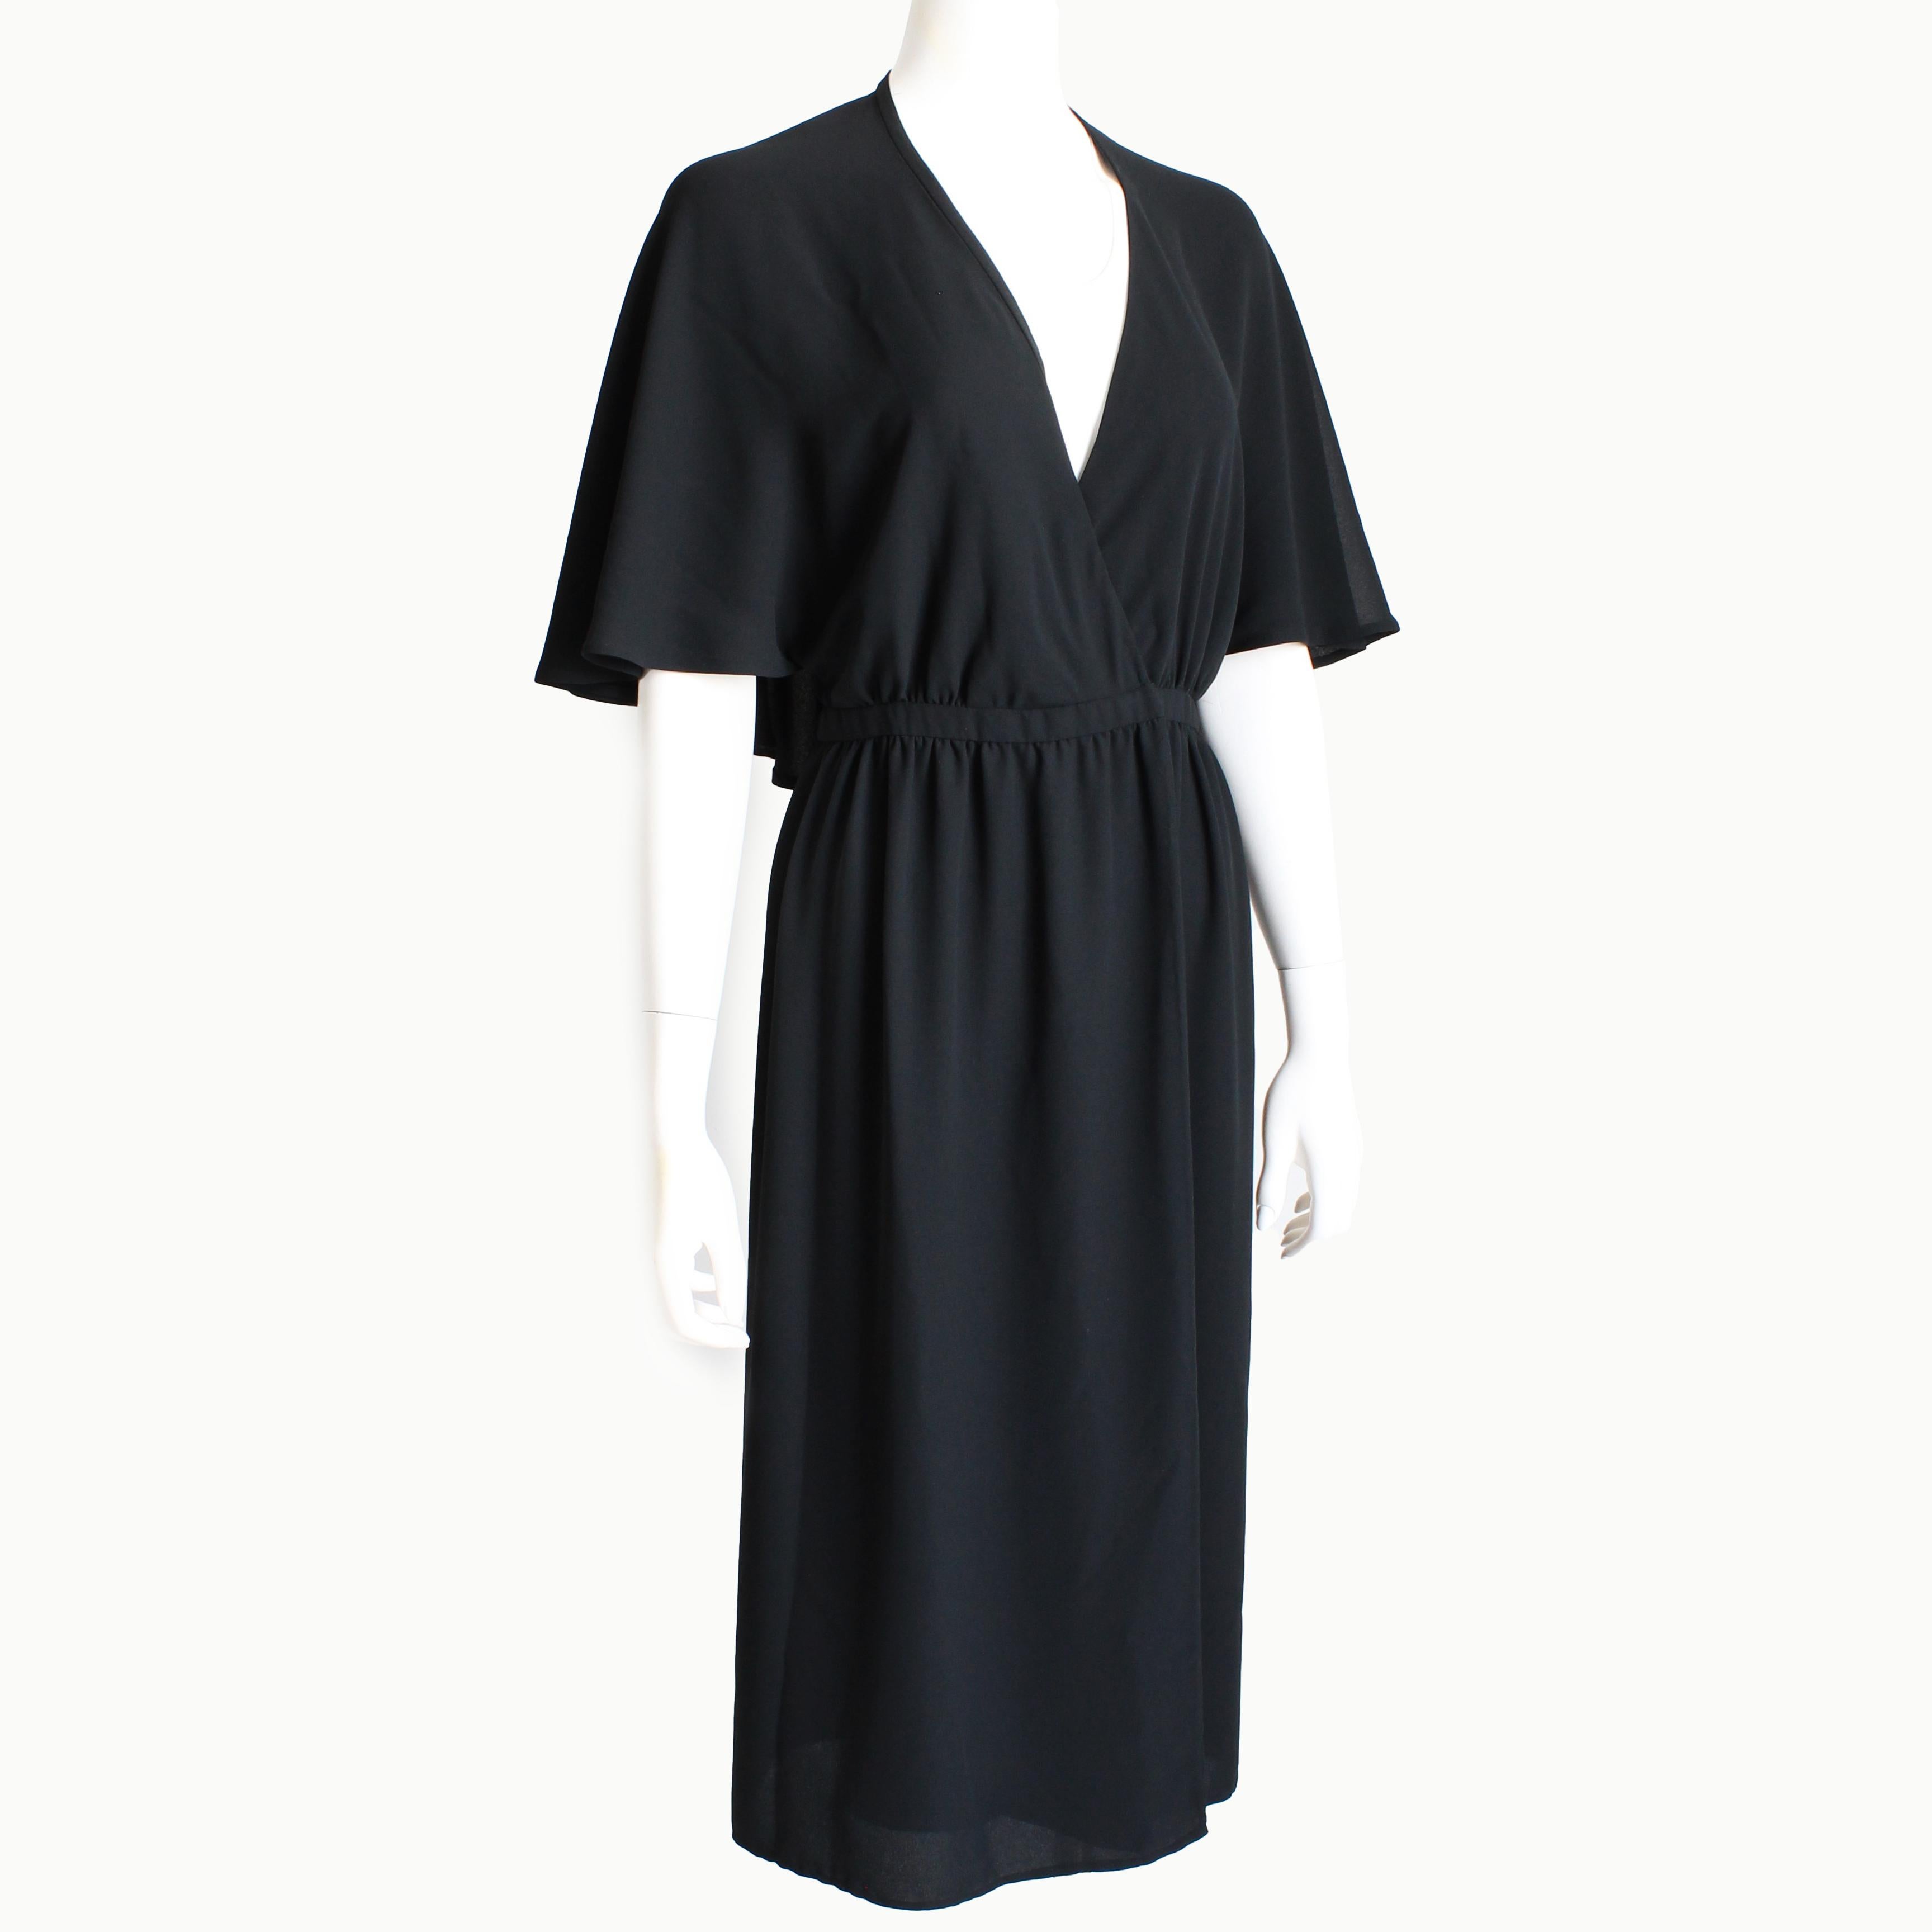 Fabulous vintage Halston evening or cocktail dress, likely made in the 1970s. This chic little black dress is made from gorgeous black silk, and features a halter top with an attached flowing capelet. A true wrap dress, it fastens at the waist with